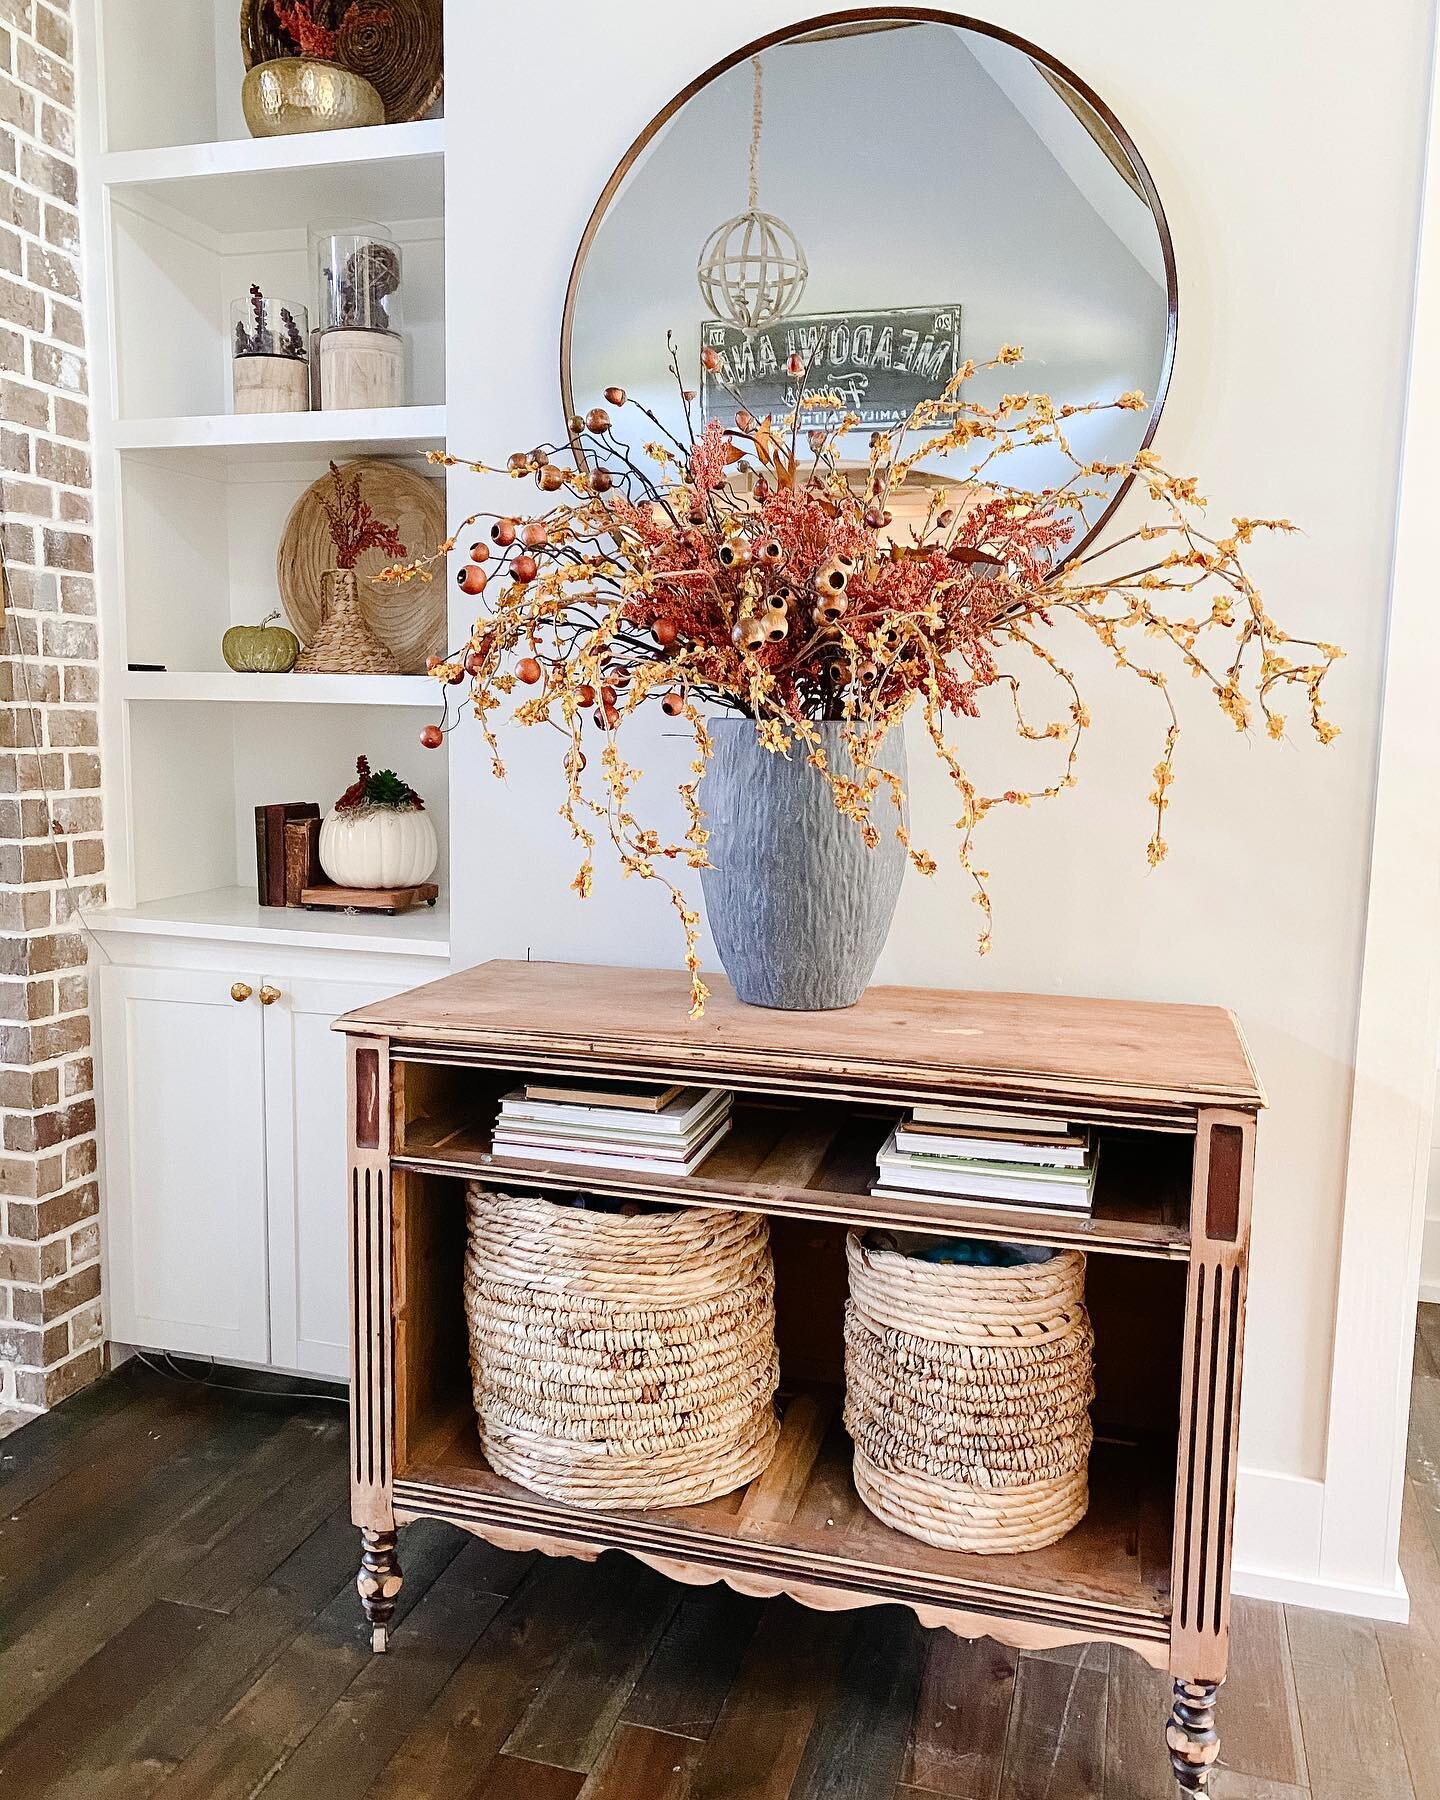 Here is my first look at #fall for 2020! I stuck with the same color tones I used last year. There is something I love about the deep understated rusts and browns! I shared in #reels today that my first step in adding seasonal decor is to gather all 